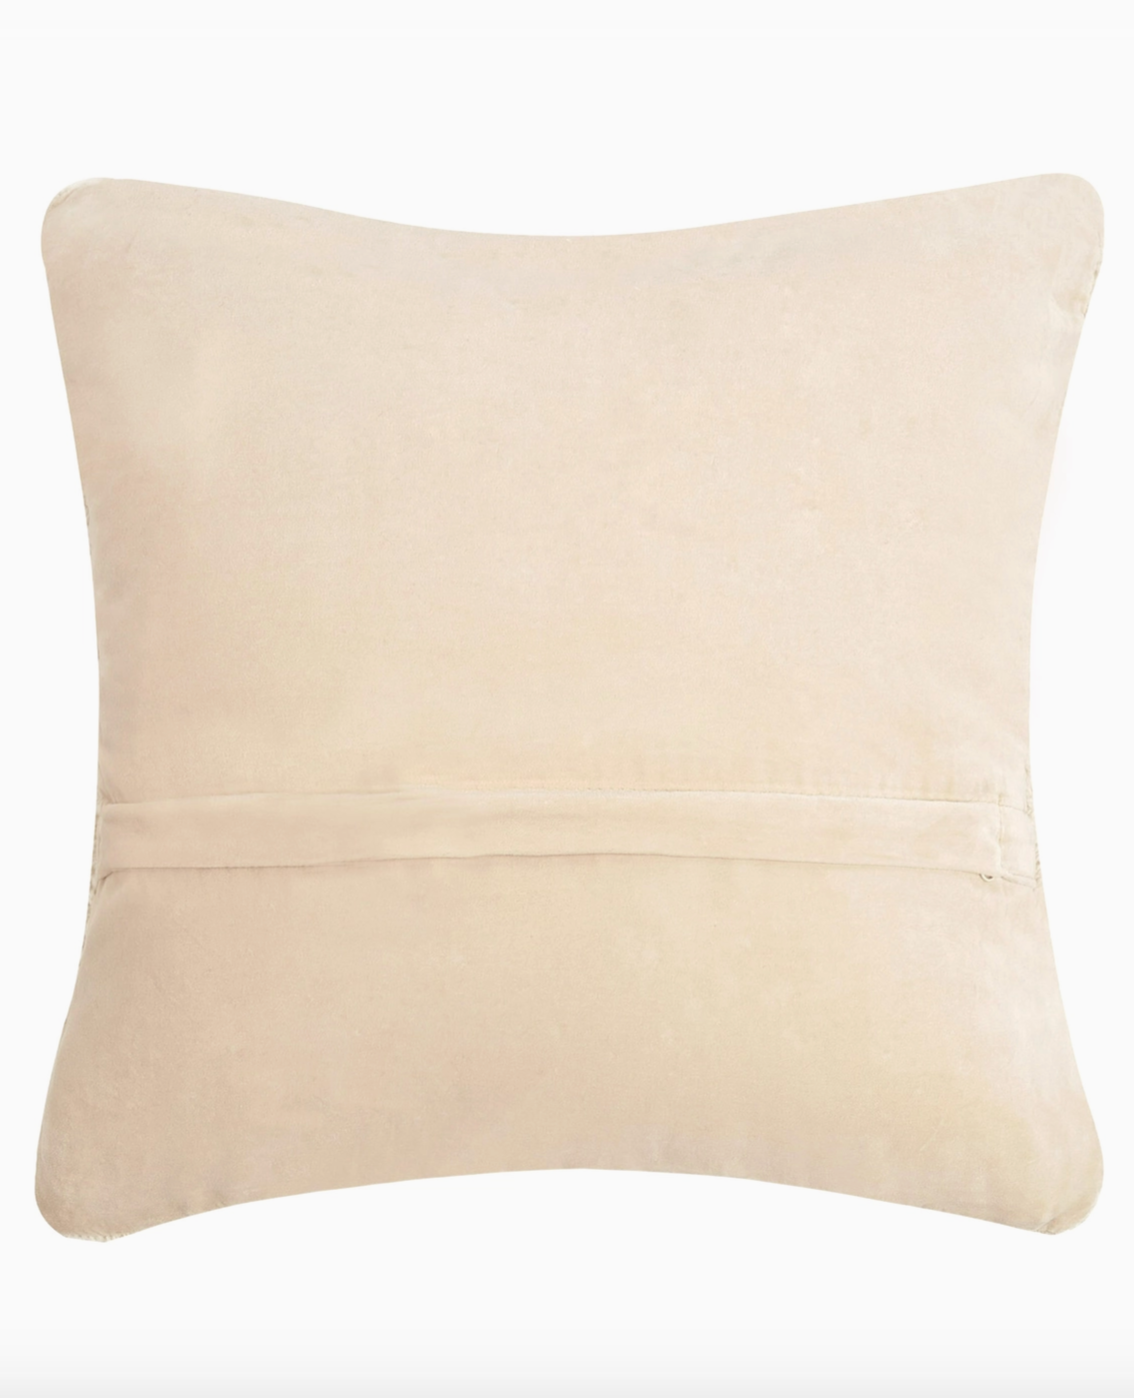 100% wool hooked accent pillow back